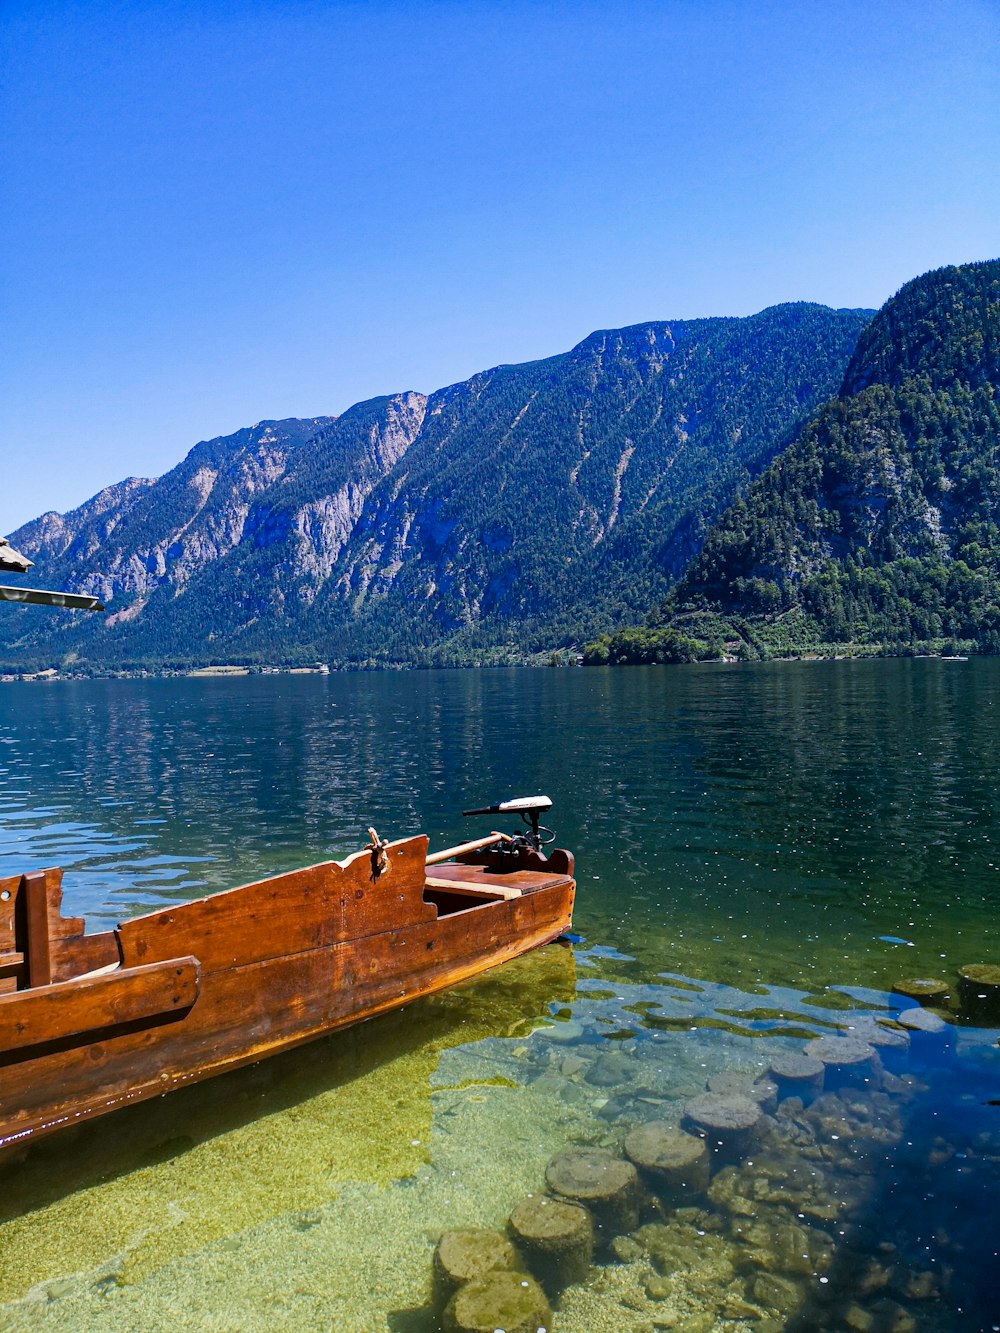 brown wooden boat on water near mountain during daytime